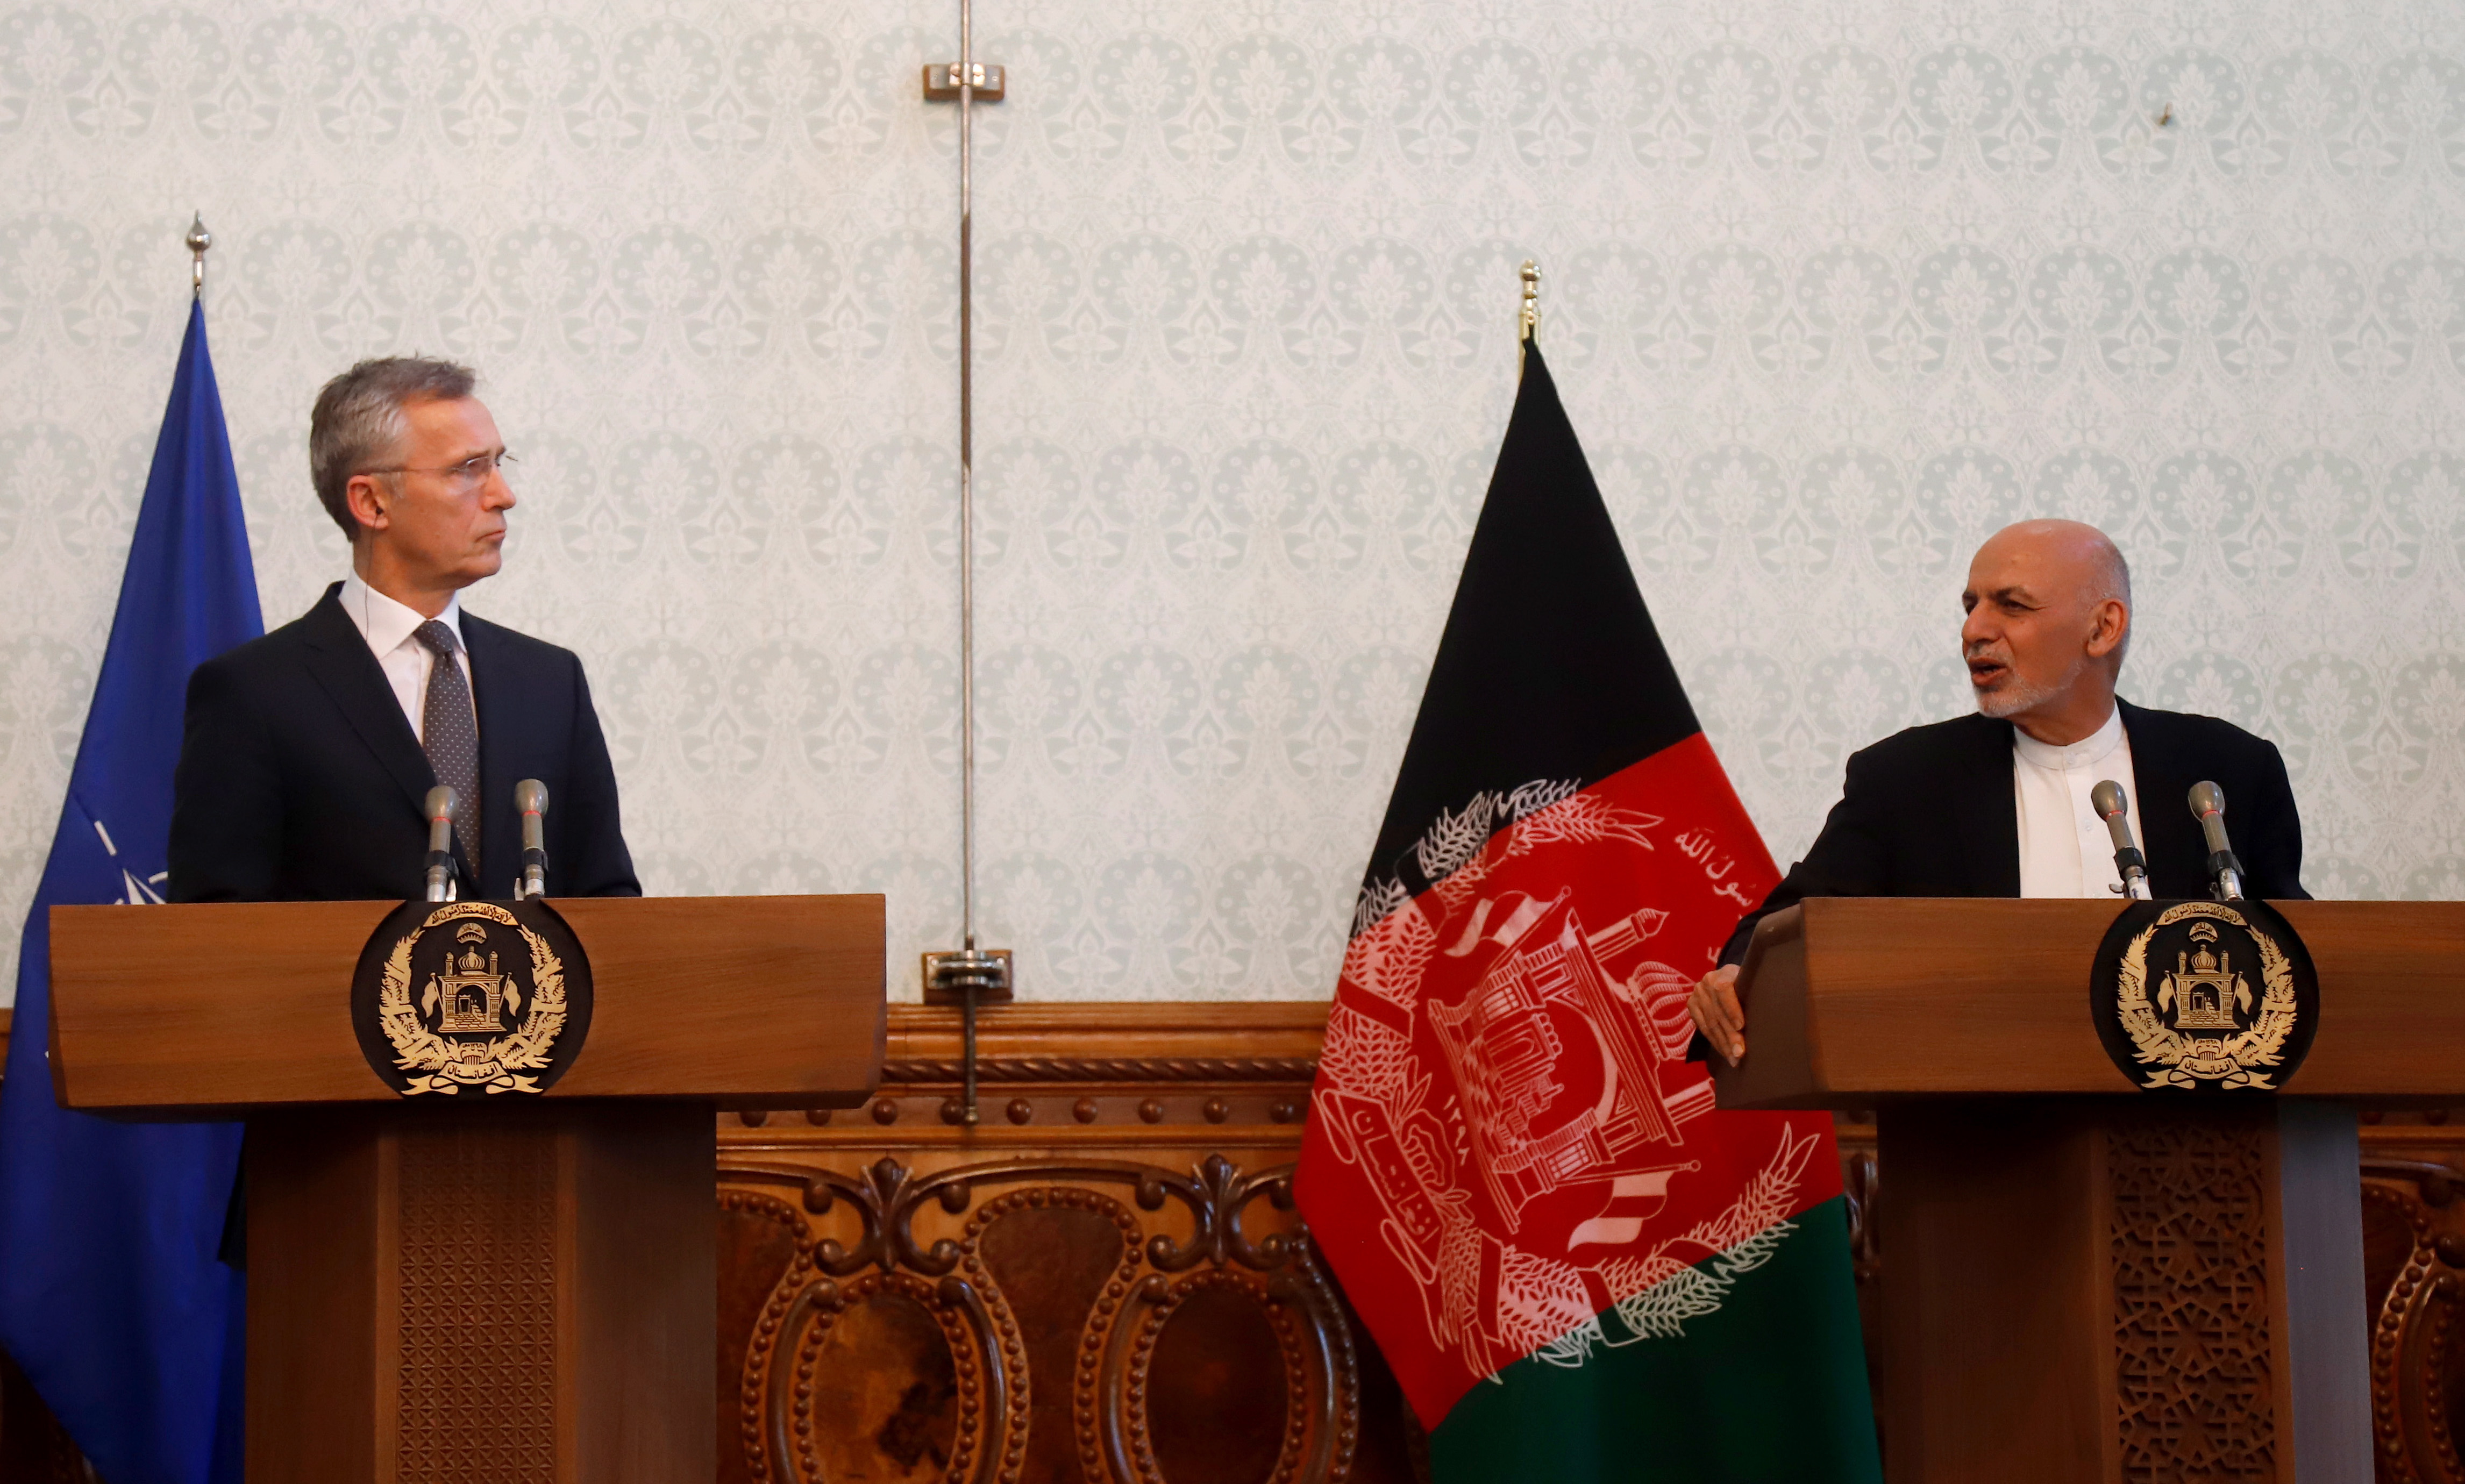 epa07145003 Afghanistan President Mohammad Ashraf Ghani (R) and NATO Secretary General Jens Stoltenberg (L) give a joint press conference in Kabul, Afghanistan, 06 November 2018. Stoltenberg arrived in Afghanistan for meeting with Afghan leadership to share views on the security situation.  EPA/JAWAD JALALI